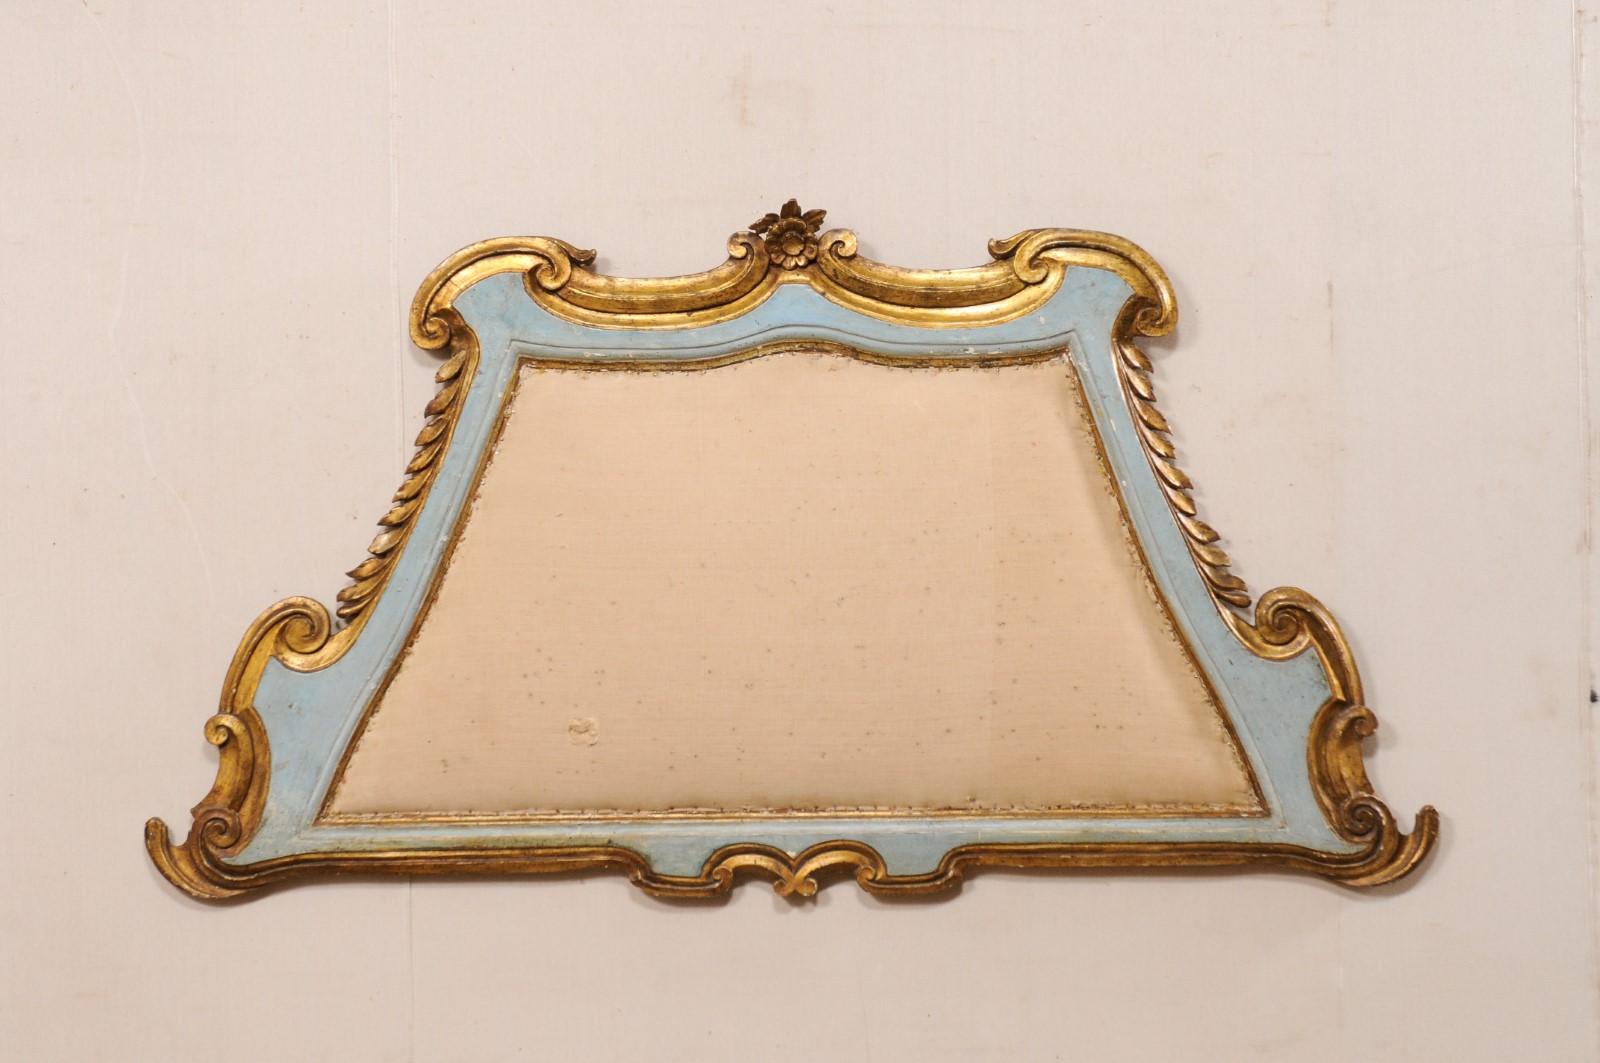 An Italian carved and gilt wall-mounted headboard, with upholstered center, from the early 20th century. This antique wall-plaque from Italy has a trapezium shaped hand carved wood frame, outlined in beautiful c-scrolls, leaves, and a single flower